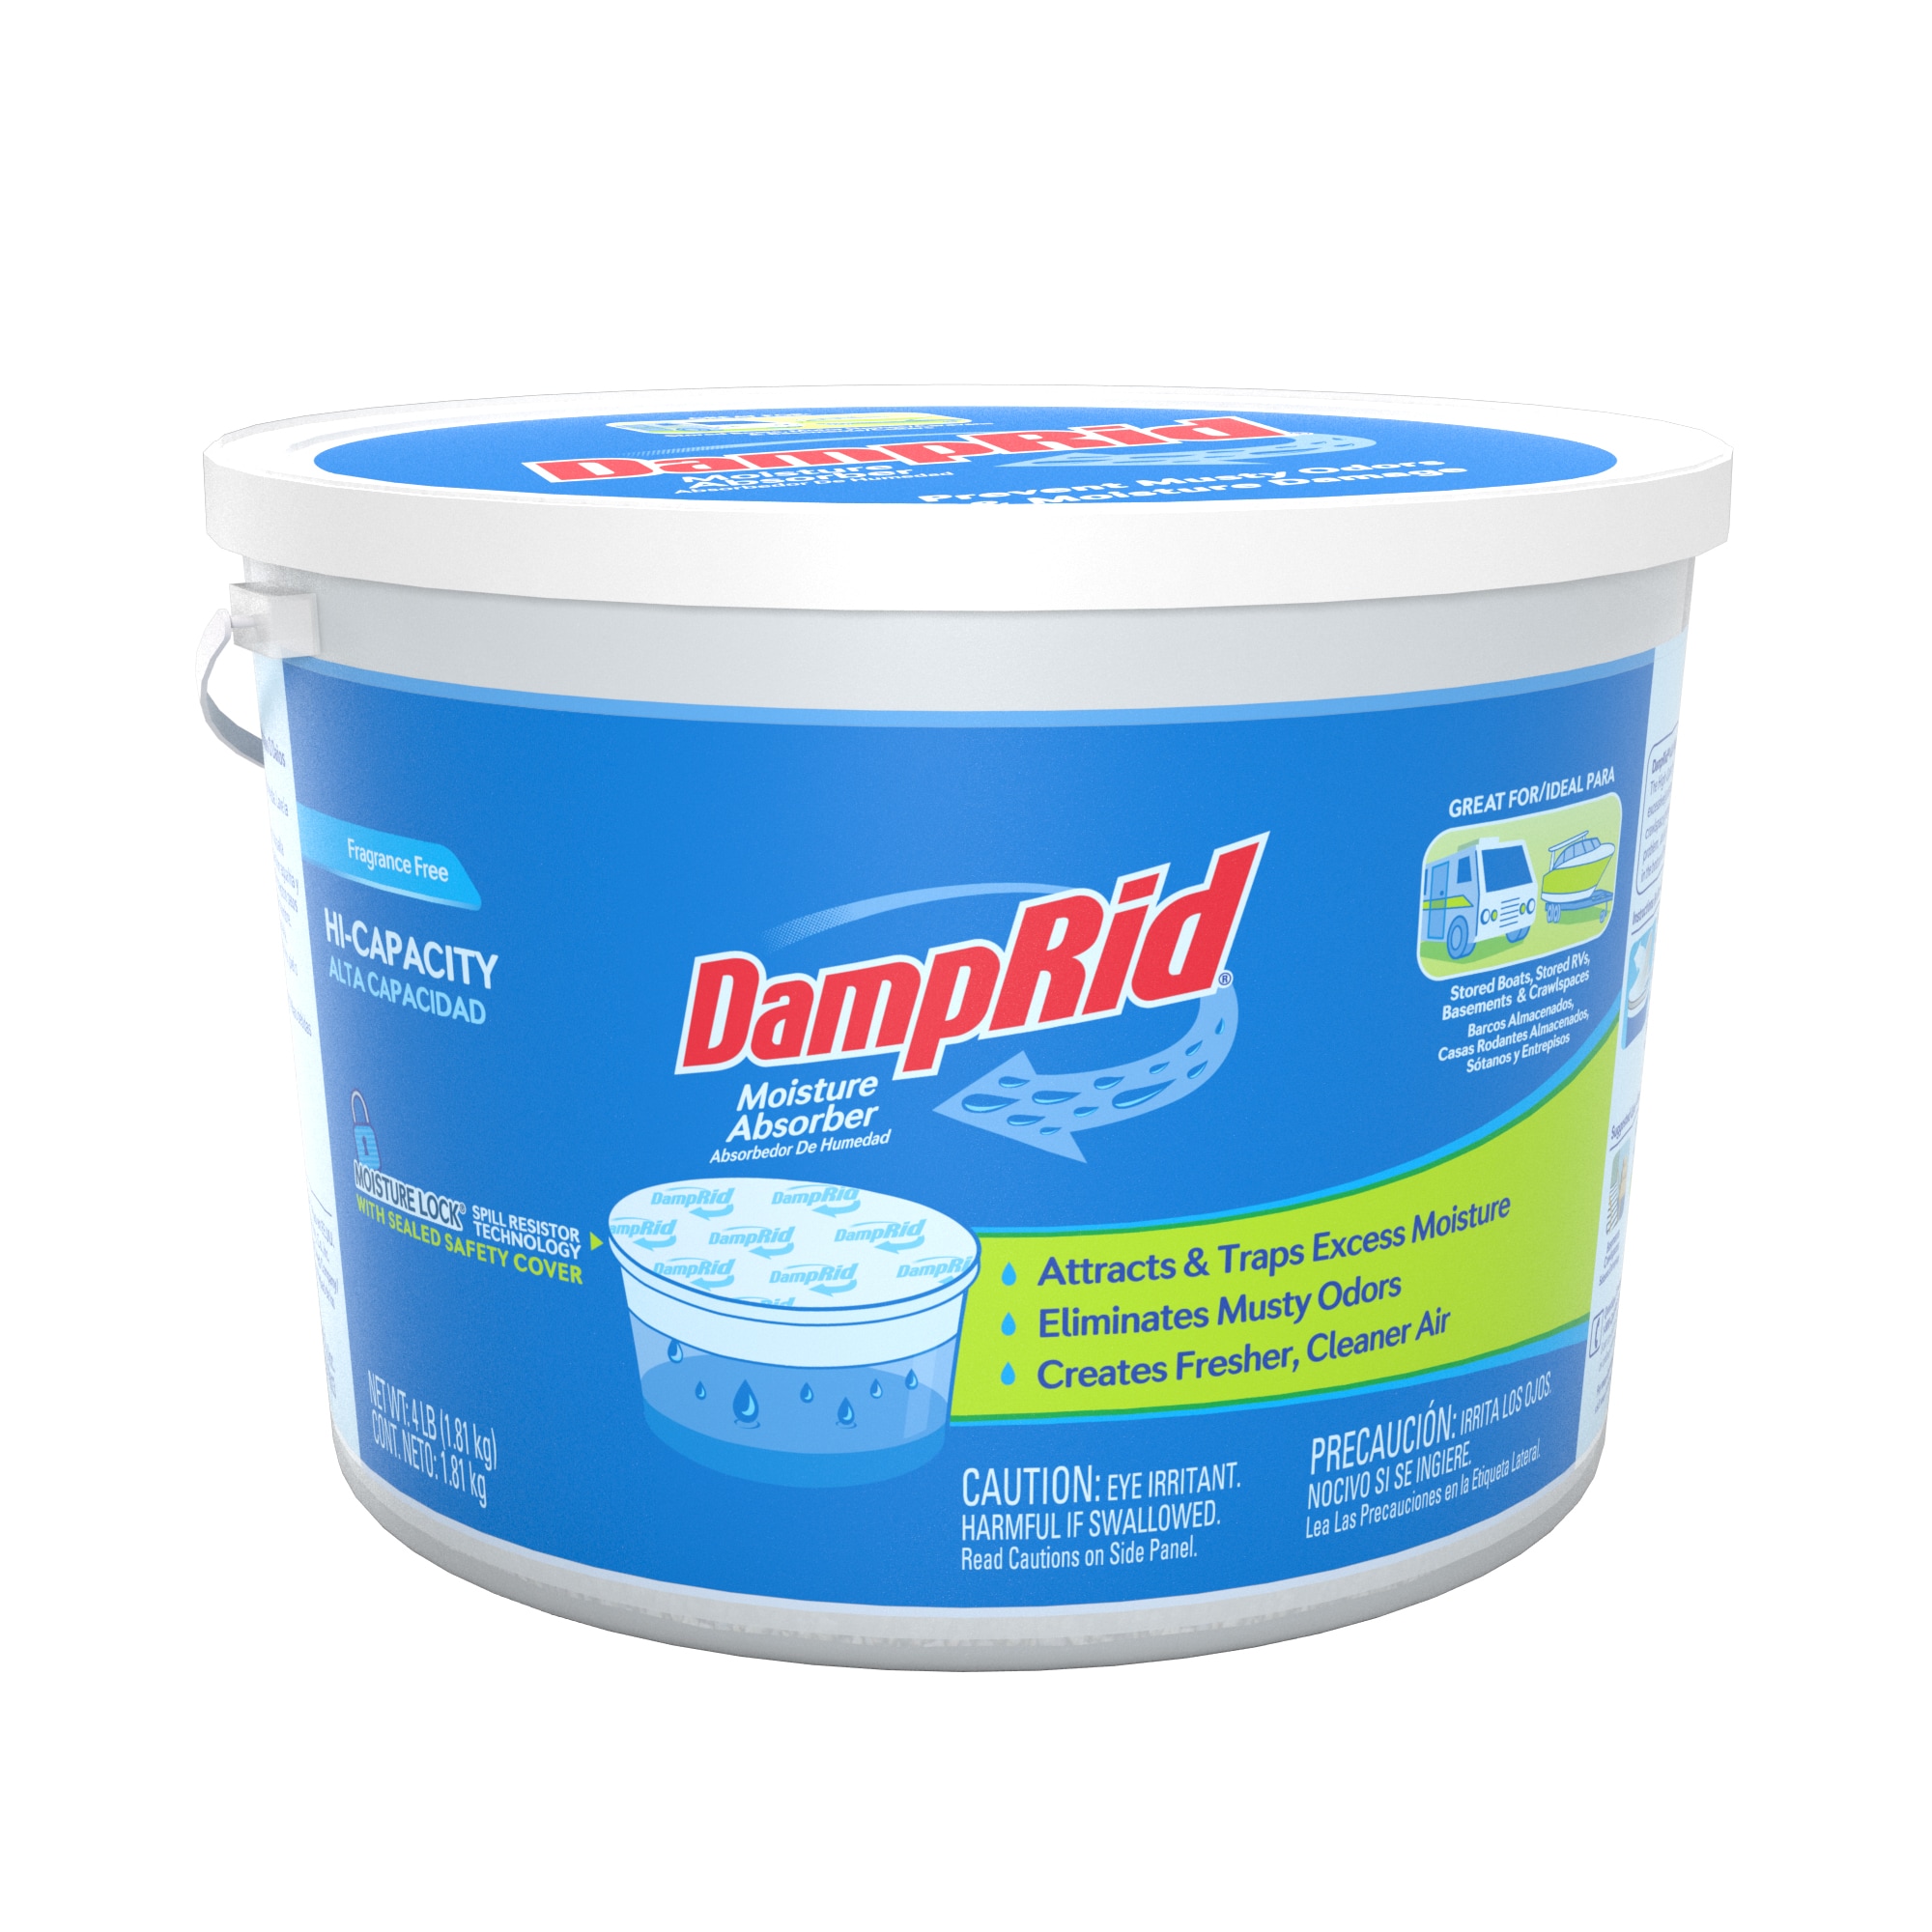 DampRid 42-oz Unscented Refill Moisture Absorber at